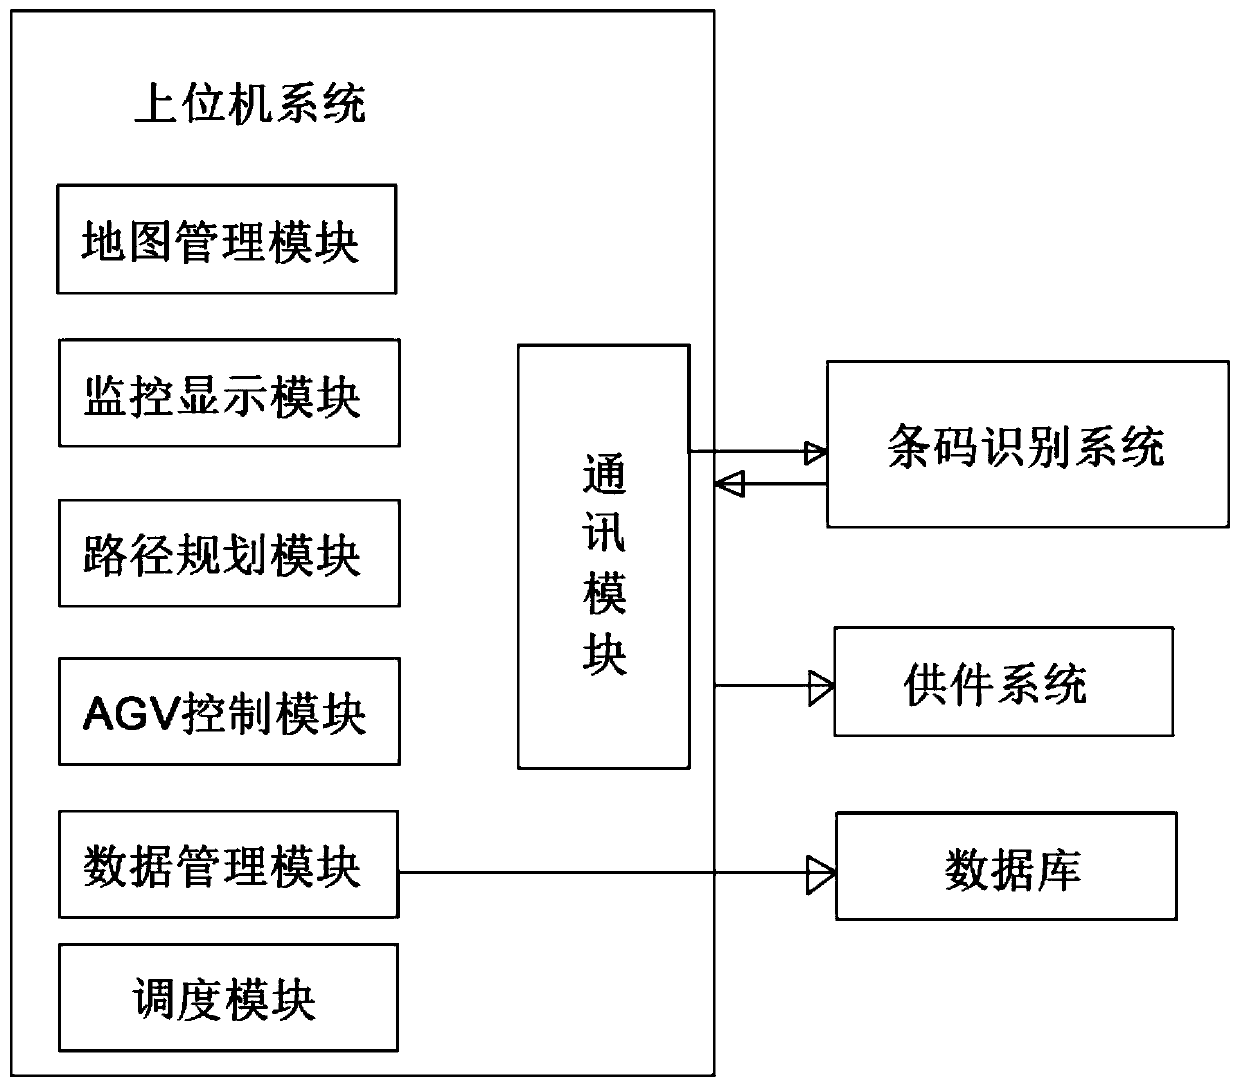 Intelligent warehousing route planning system and method based on multiple AGVs